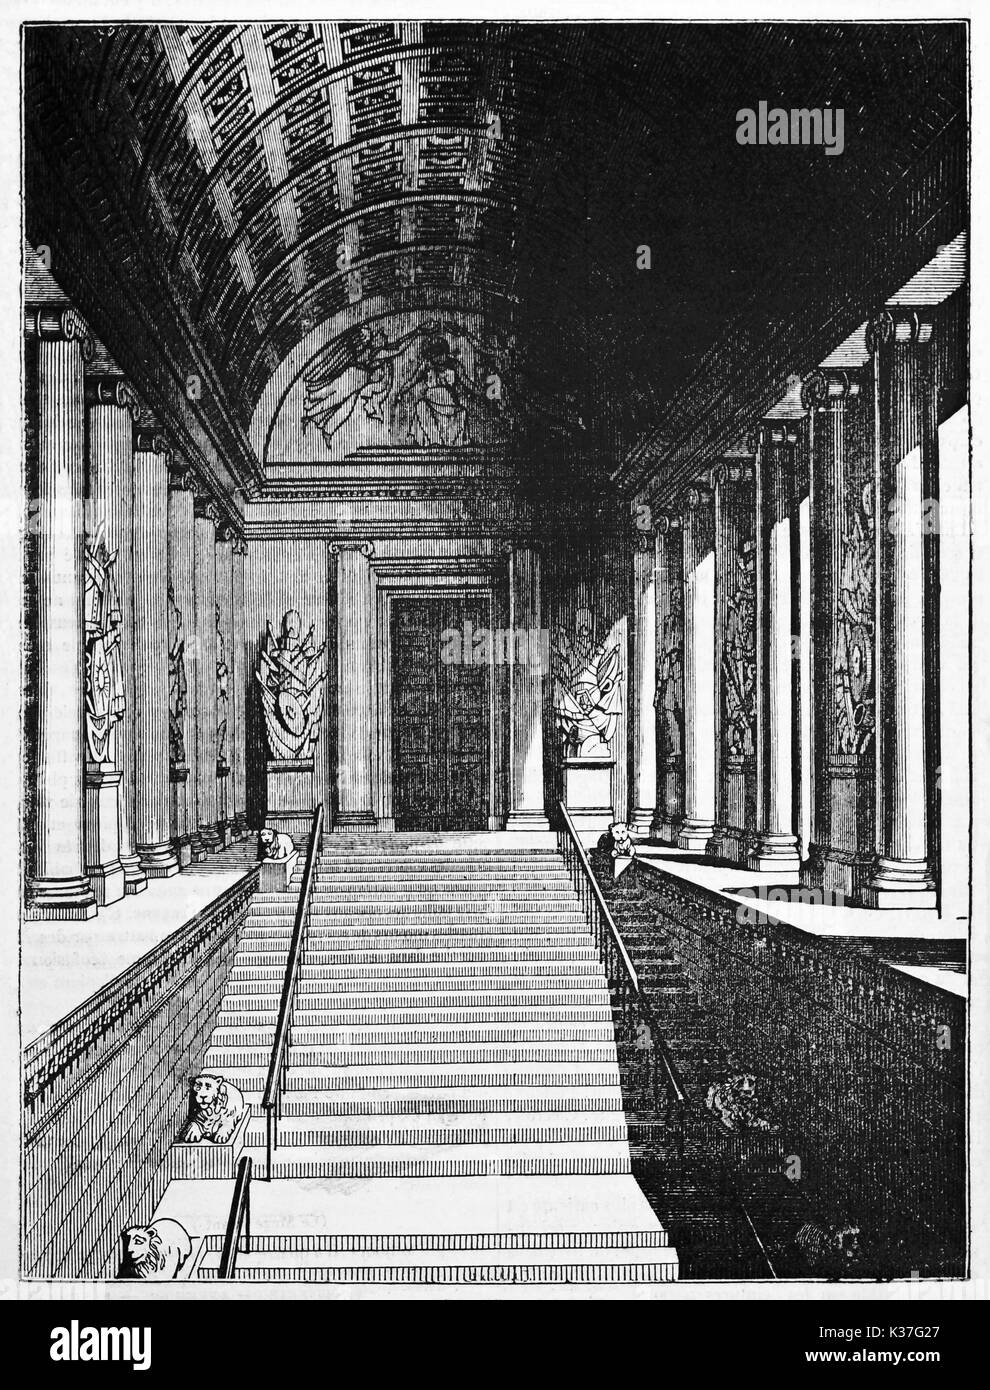 Luxenbourg Palace staircase, Paris. Interior context and central perspective. Old Illustration by Jackson, published on Magasin Pittoresque, Paris, 1834 Stock Photo